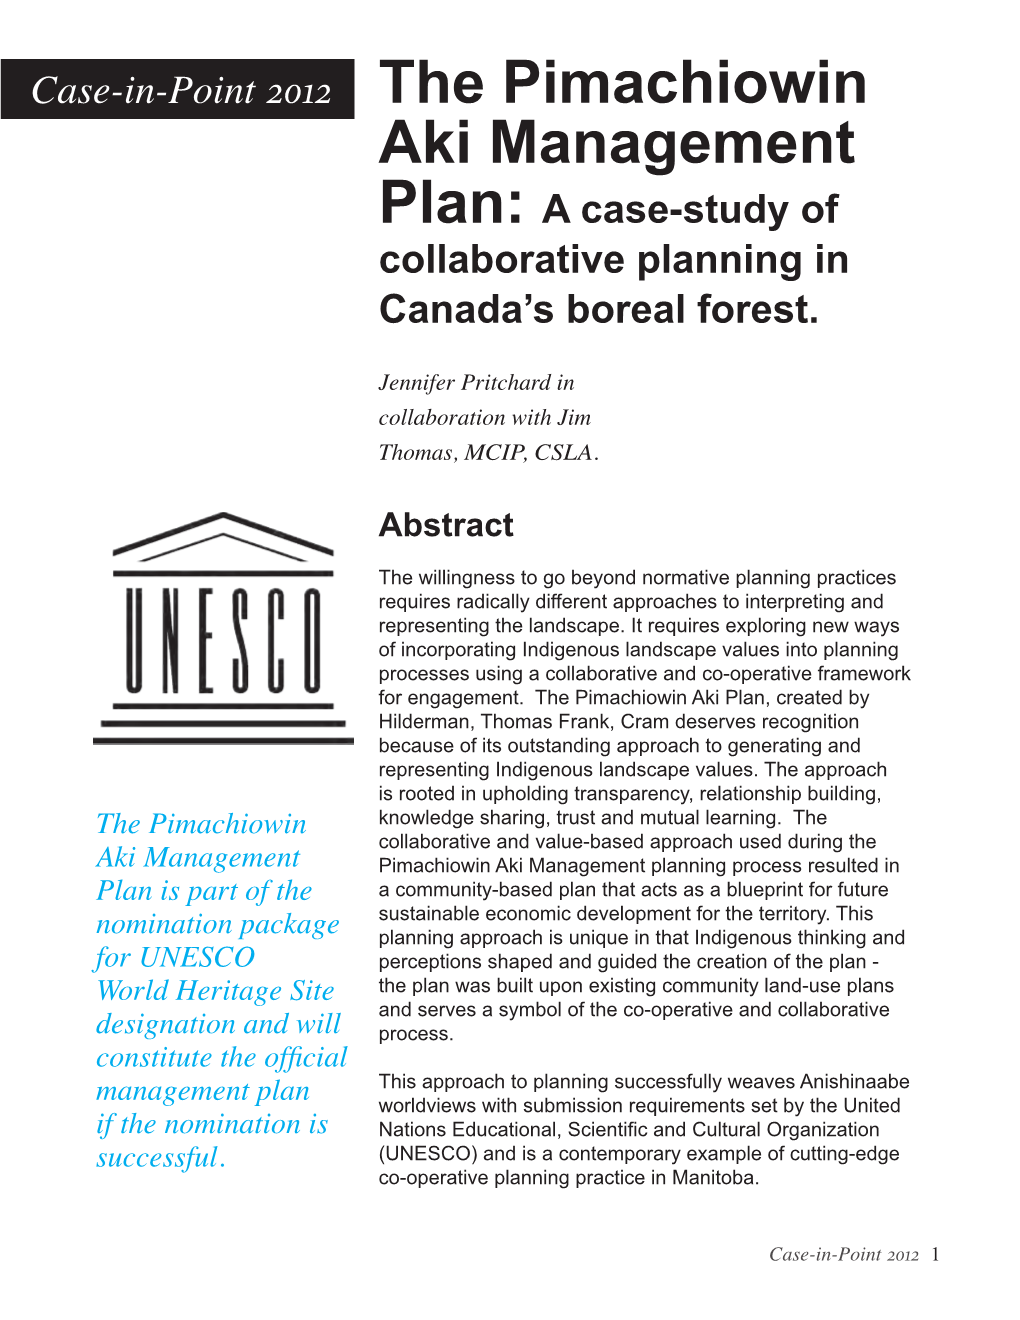 The Pimachiowin Aki Management Plan: a Case-Study of Collaborative Planning in Canada’S Boreal Forest